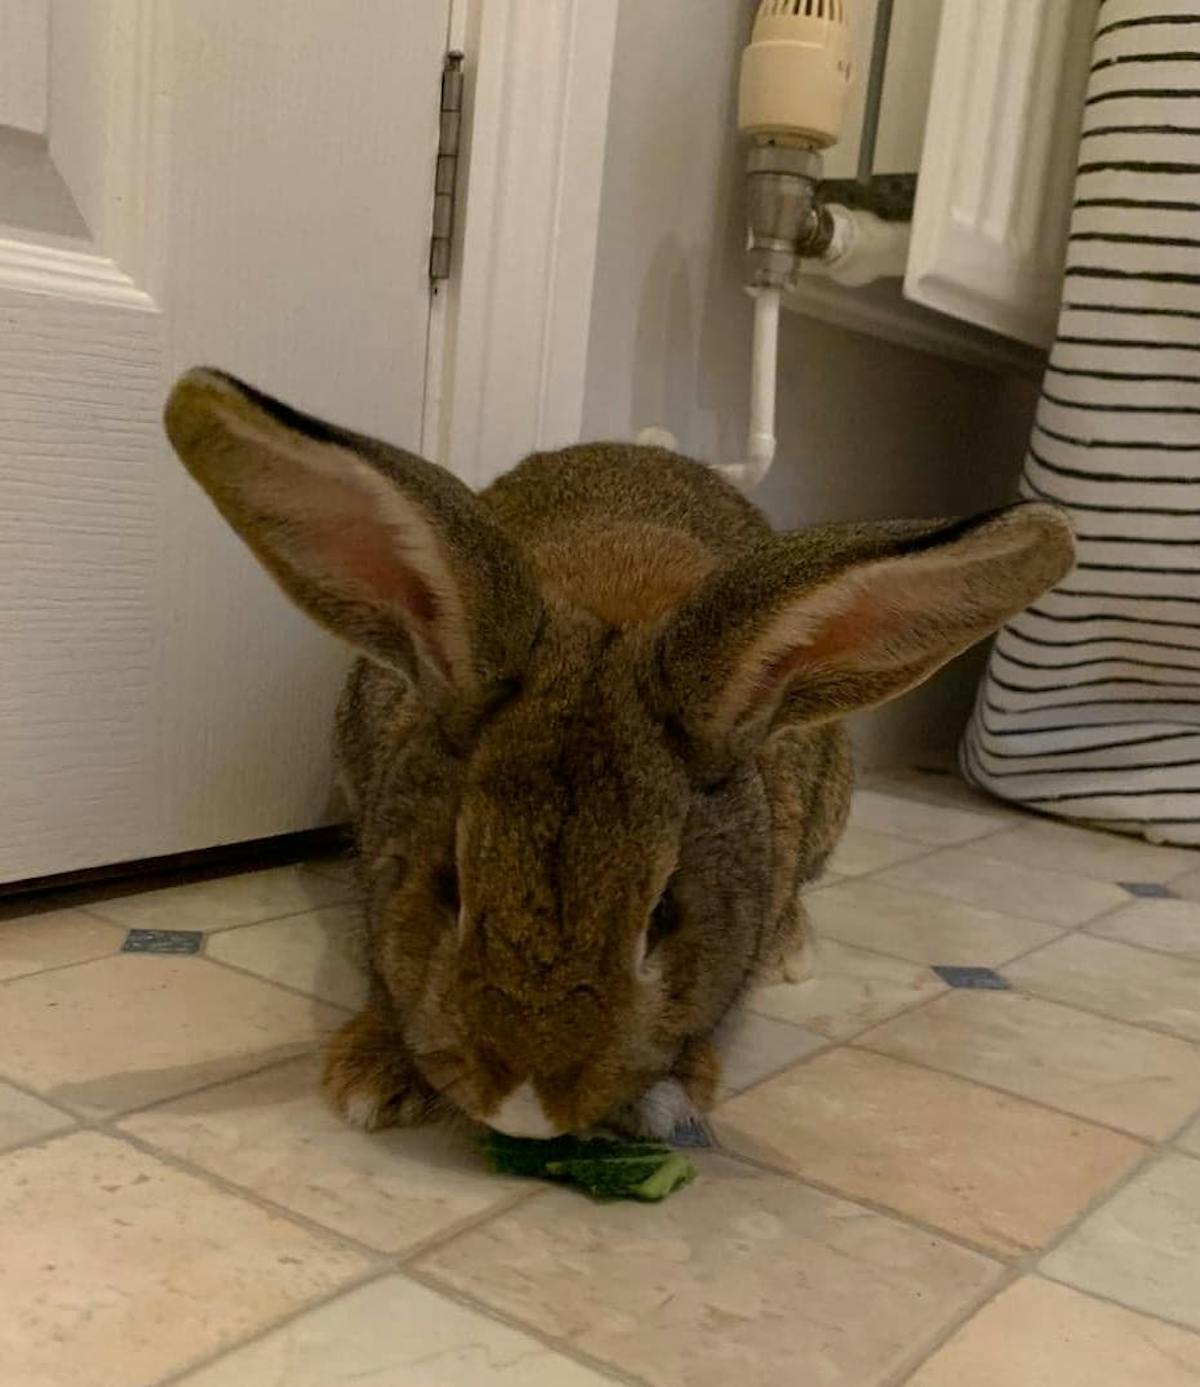 Rabbit named Ivor chewing on cabbage. 